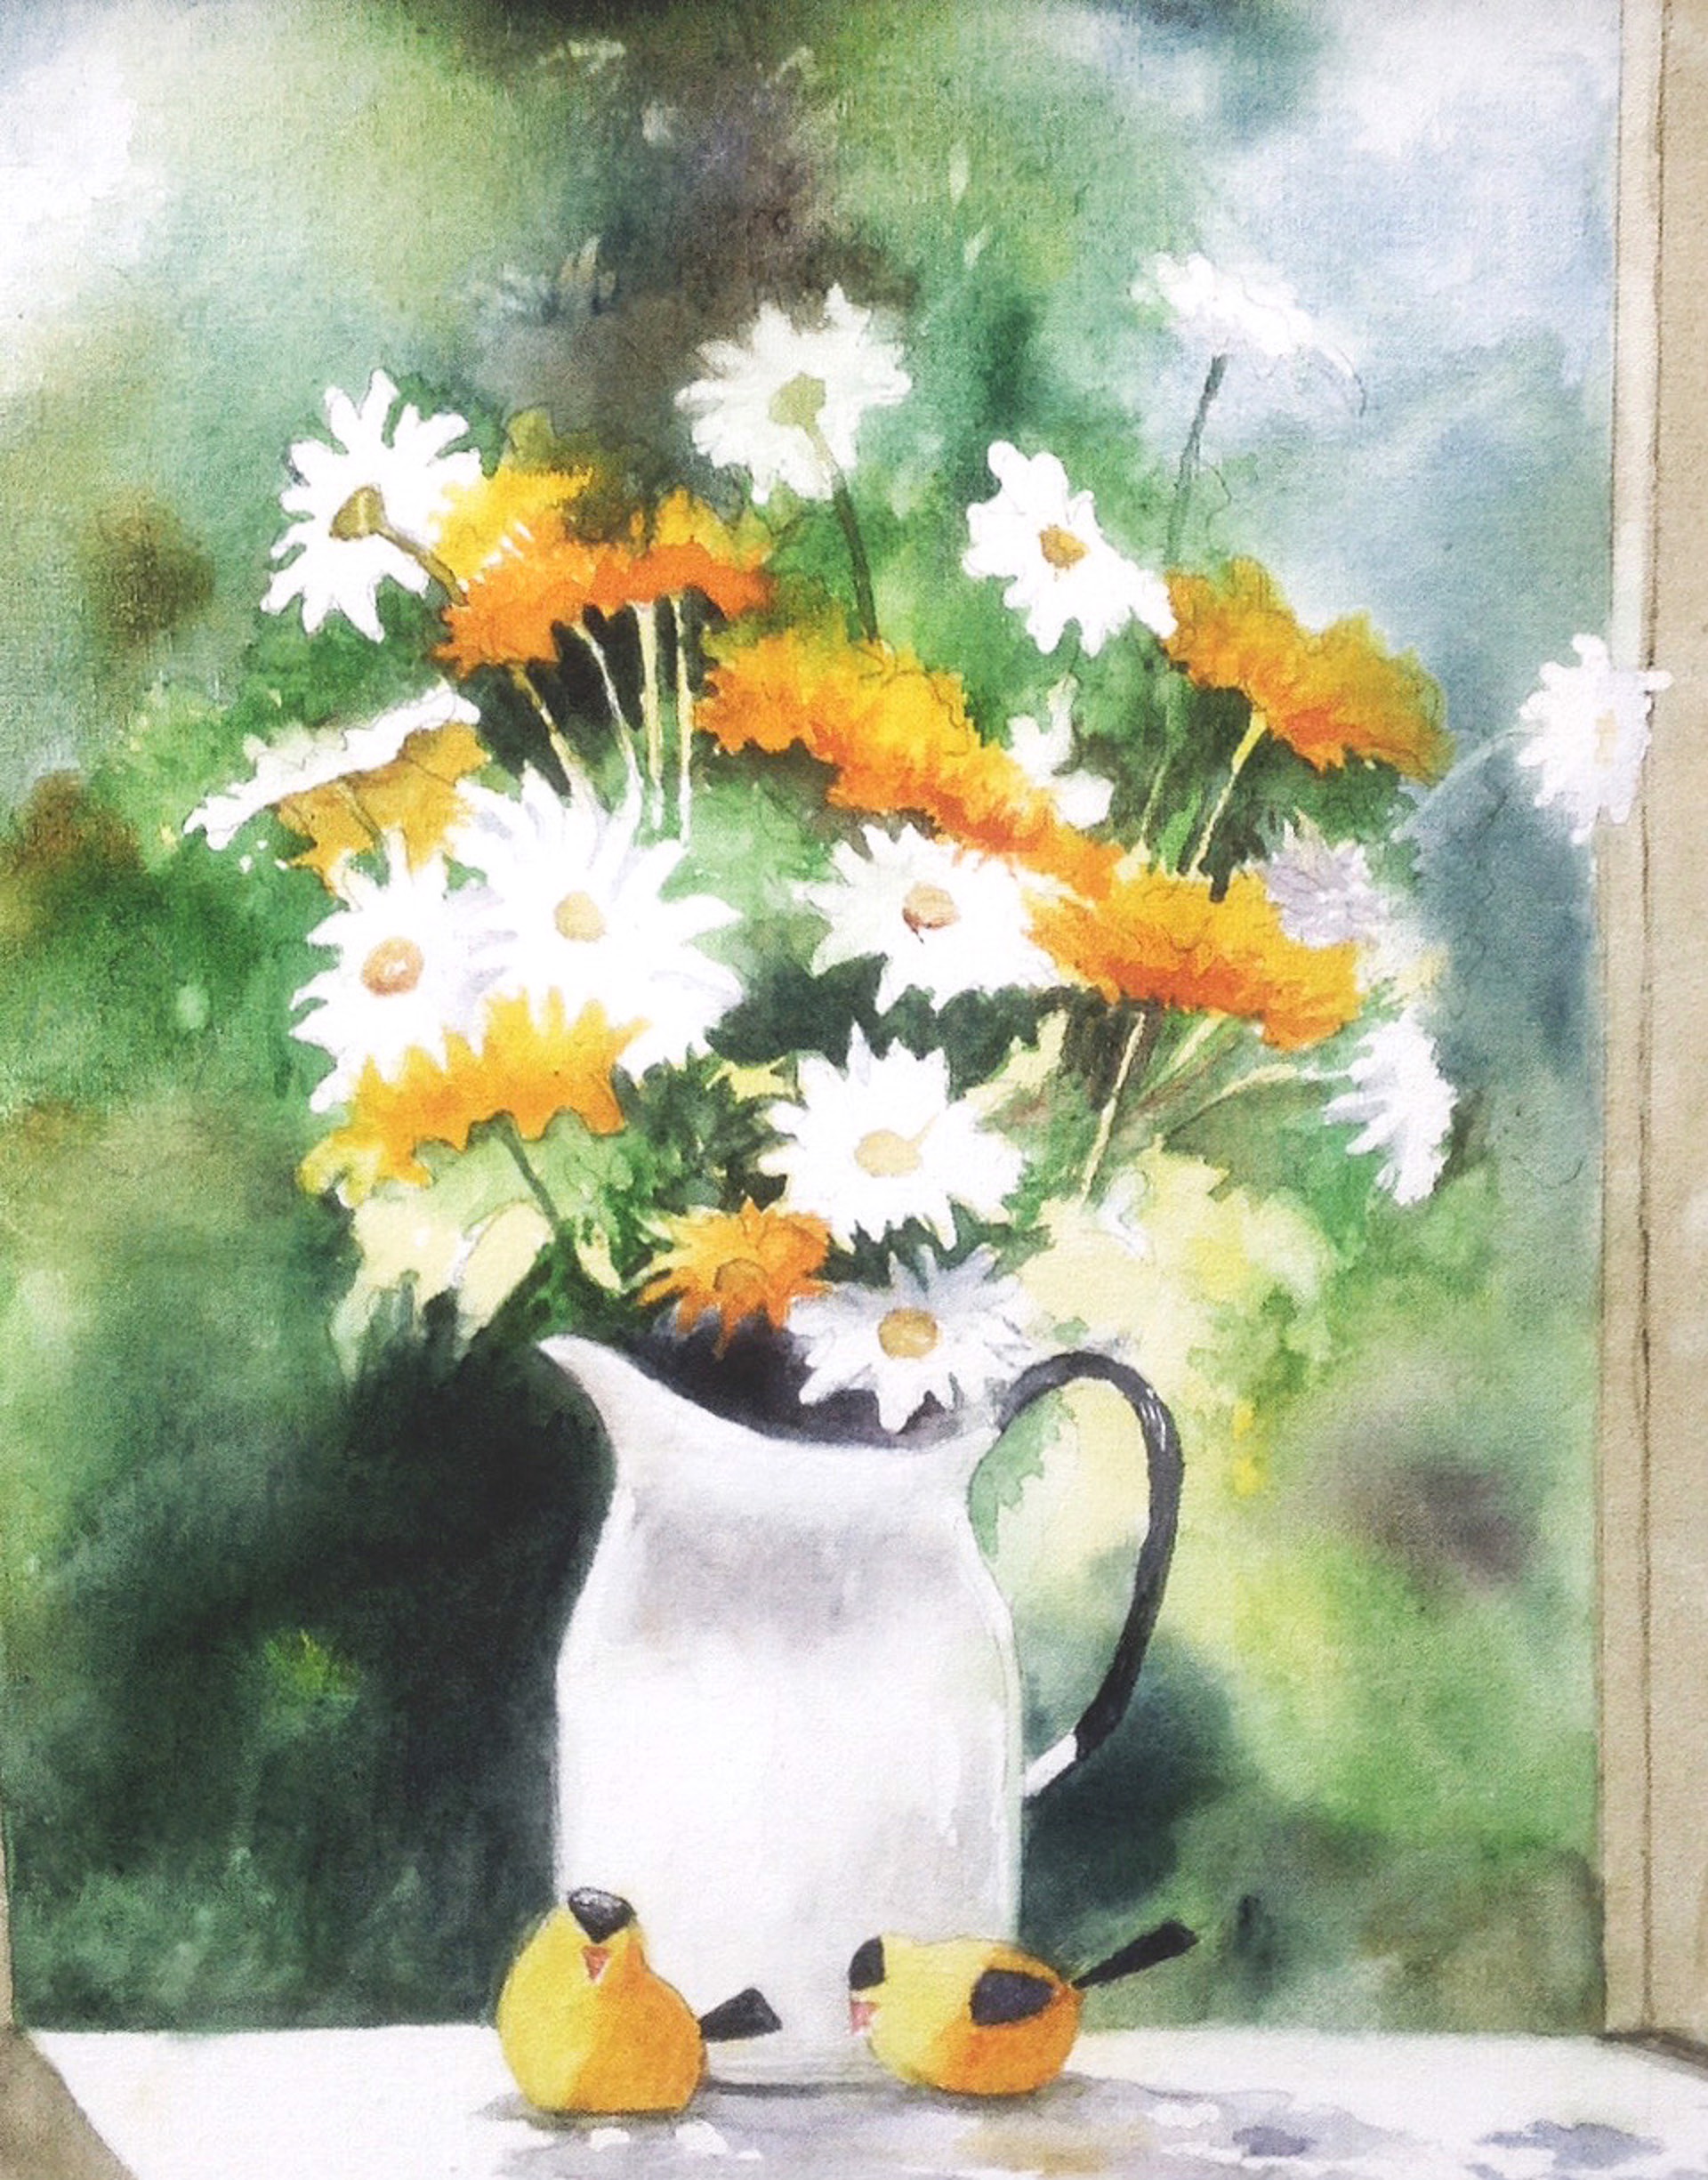 Daisies in the Window by Denise Jackson